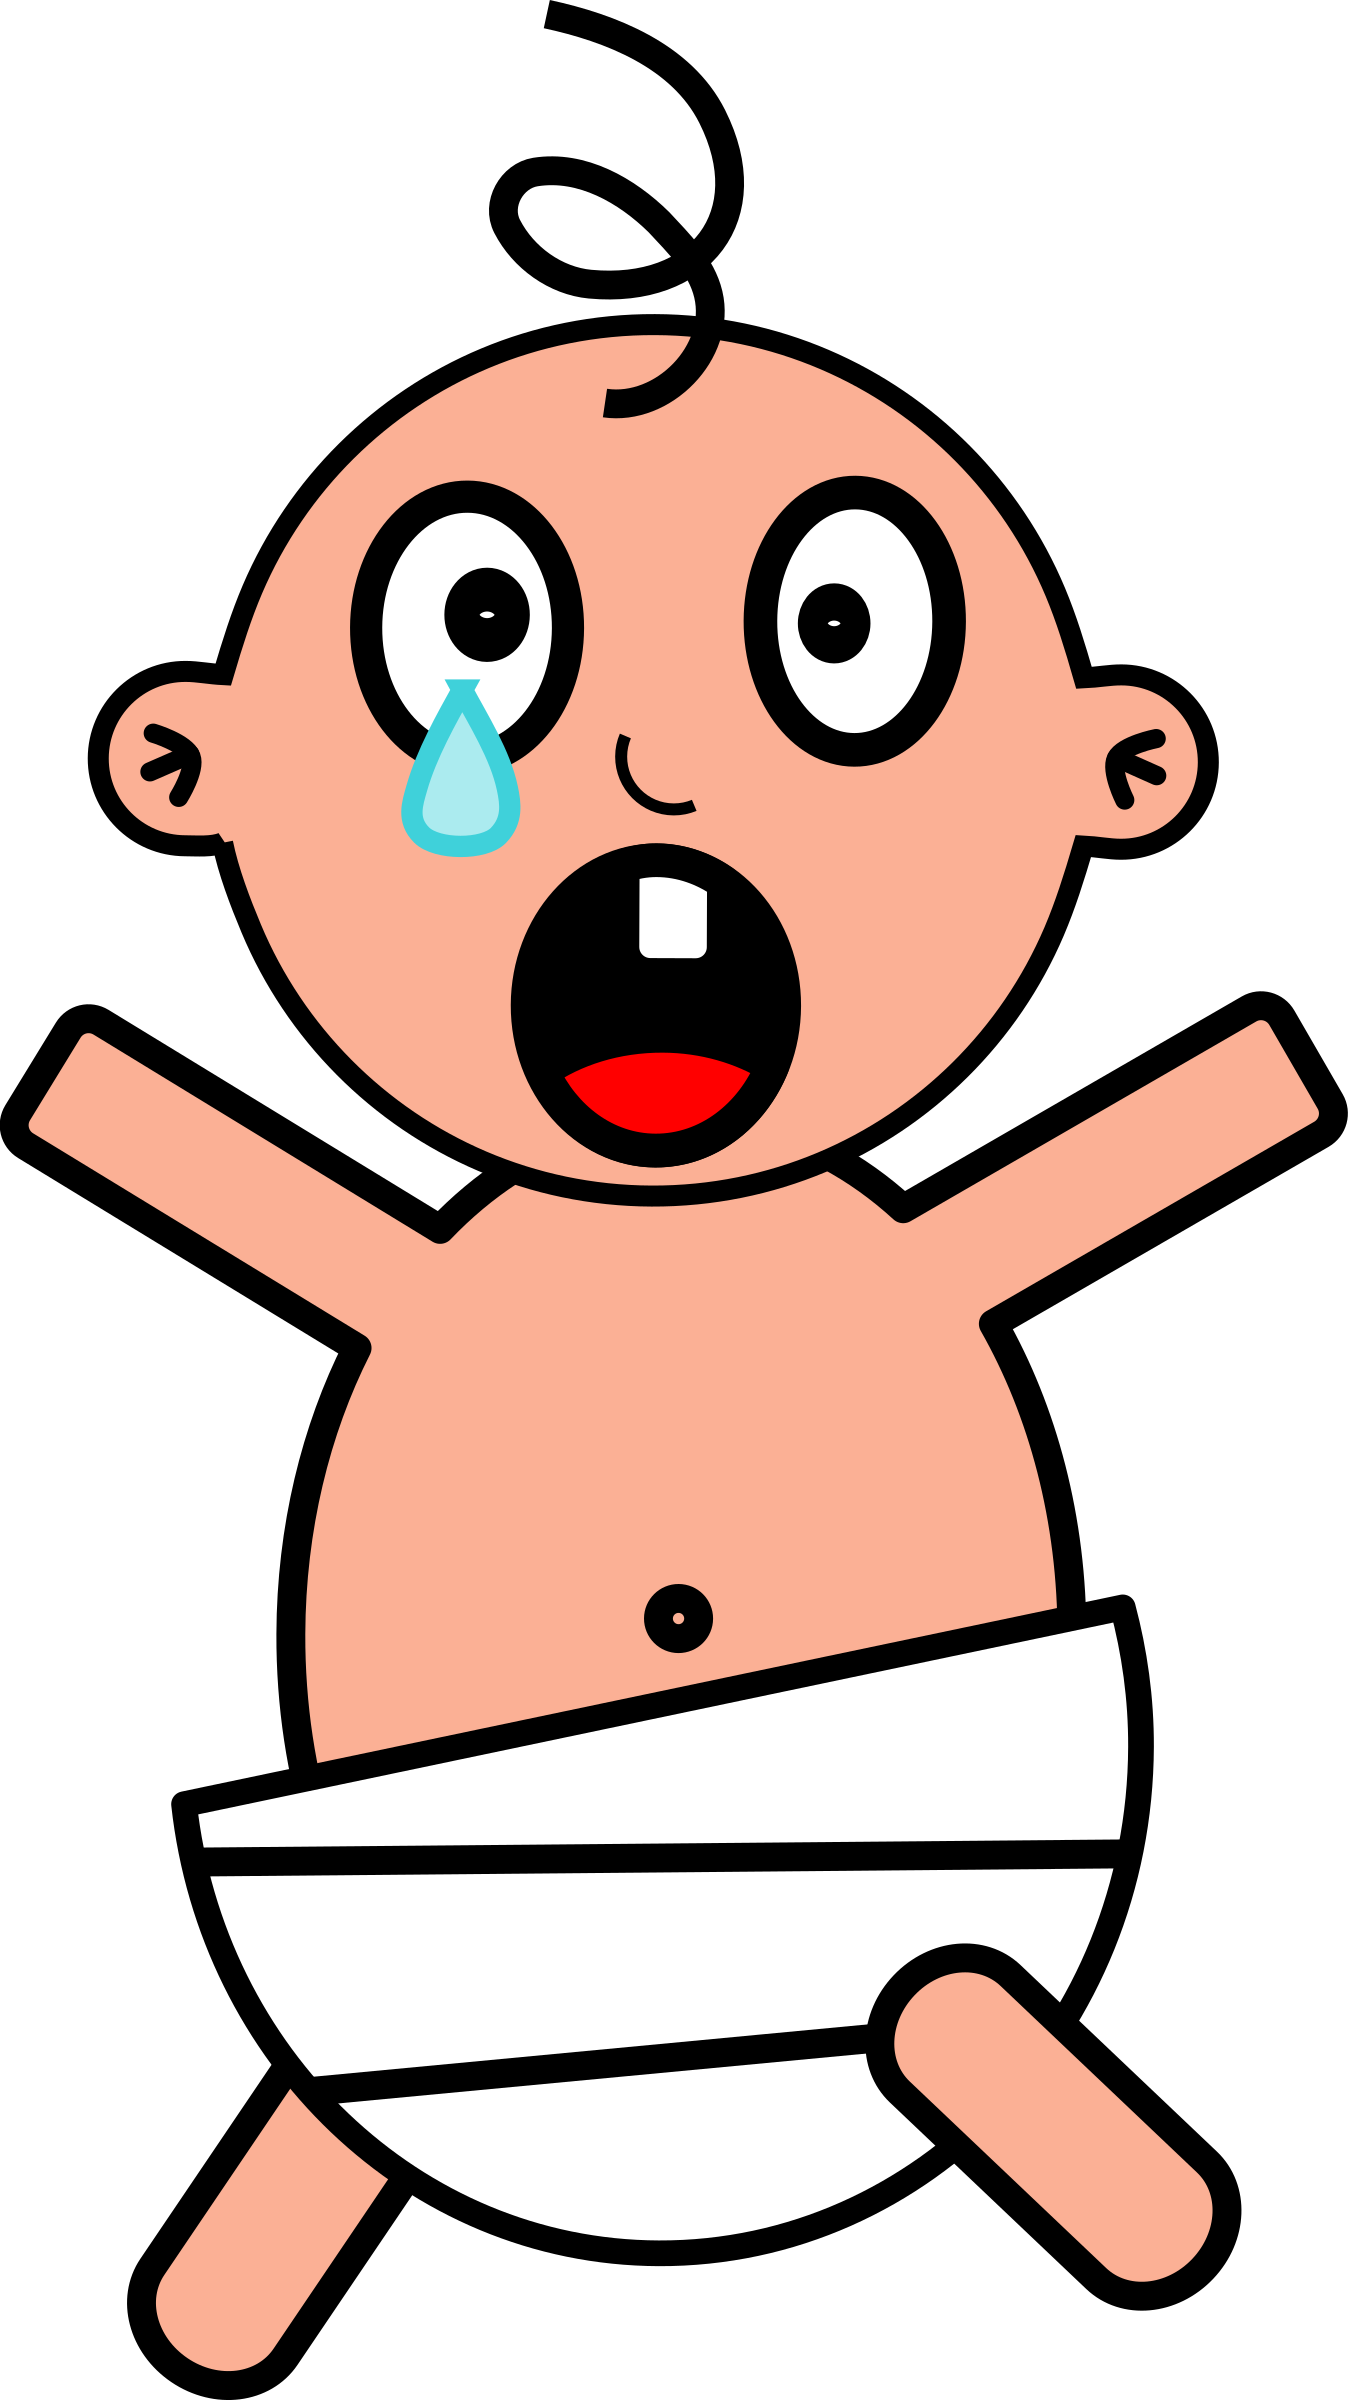 Cartoon Crying Baby - ClipArt Best